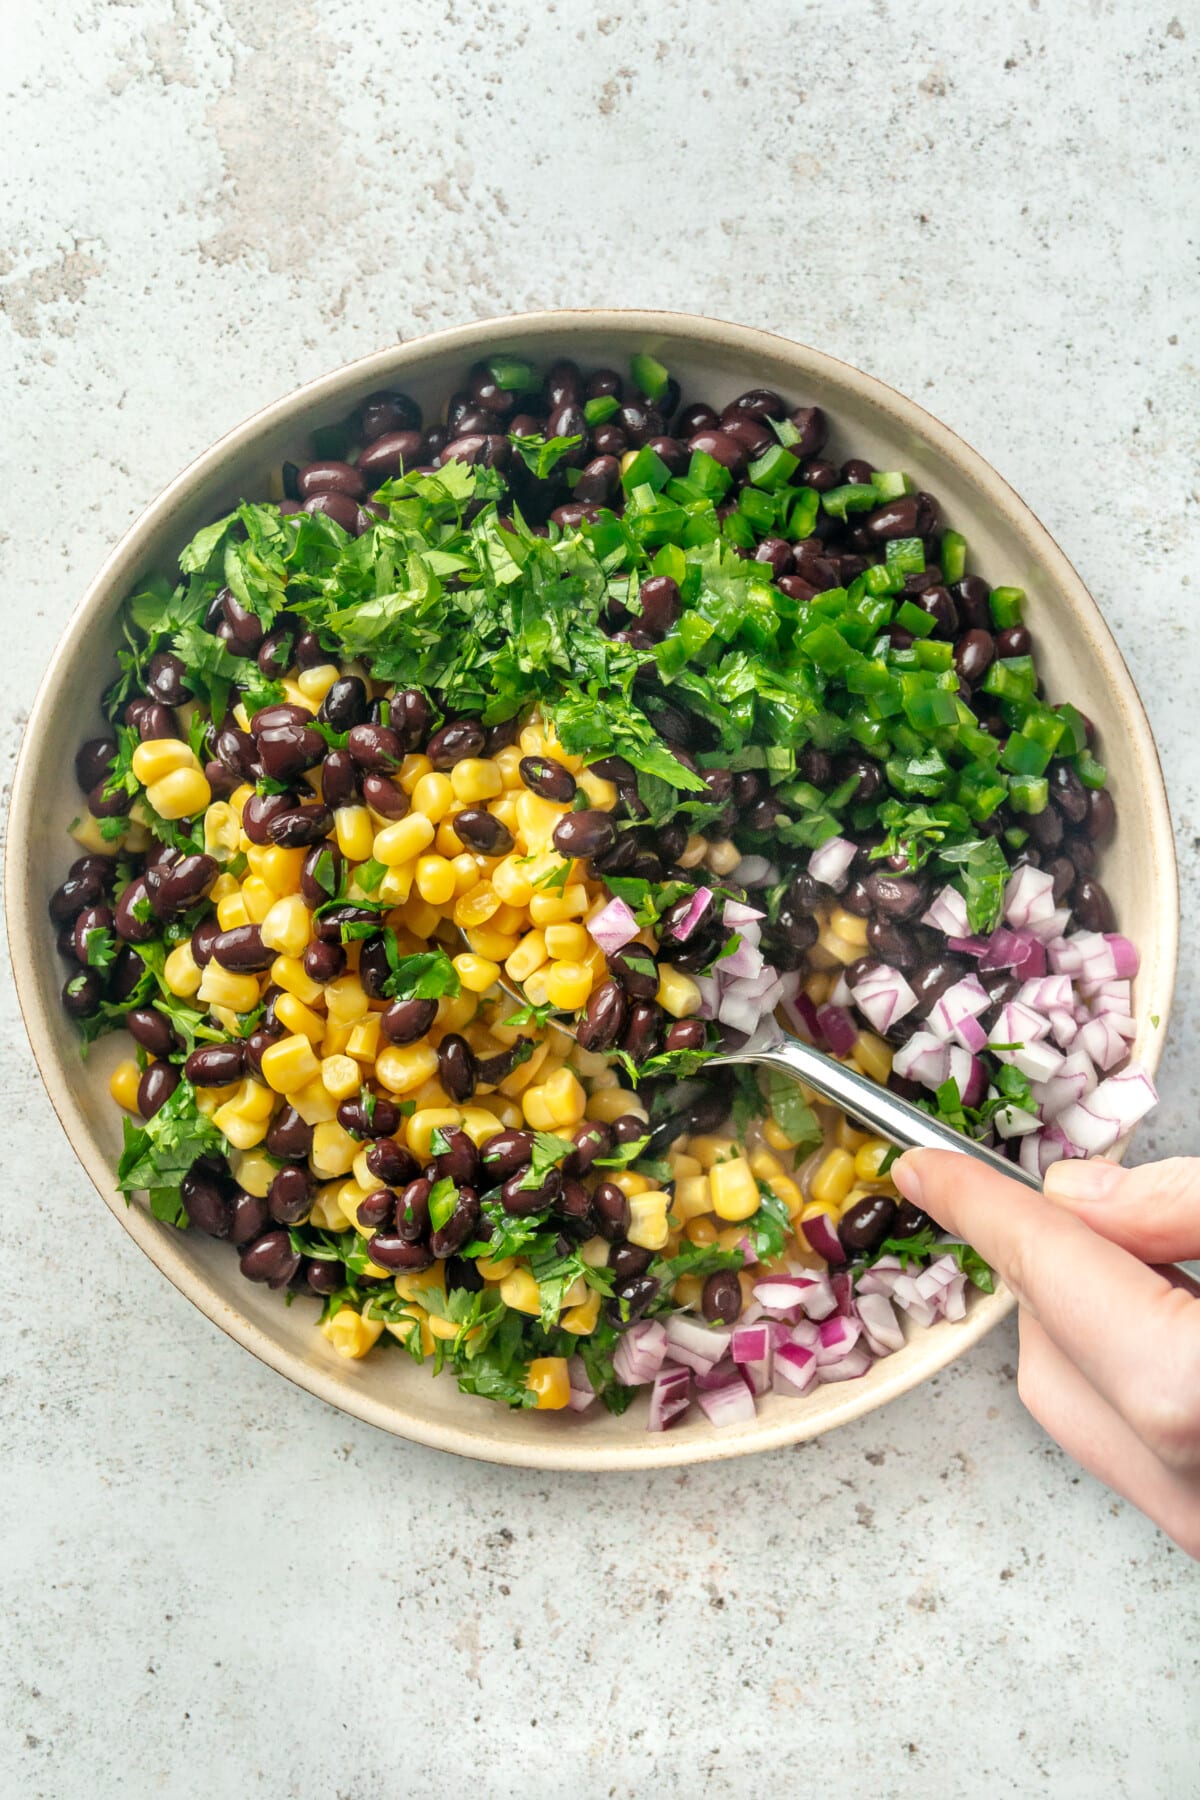 A person using a spoon to mix together ingredients for a black bean and corn salsa.